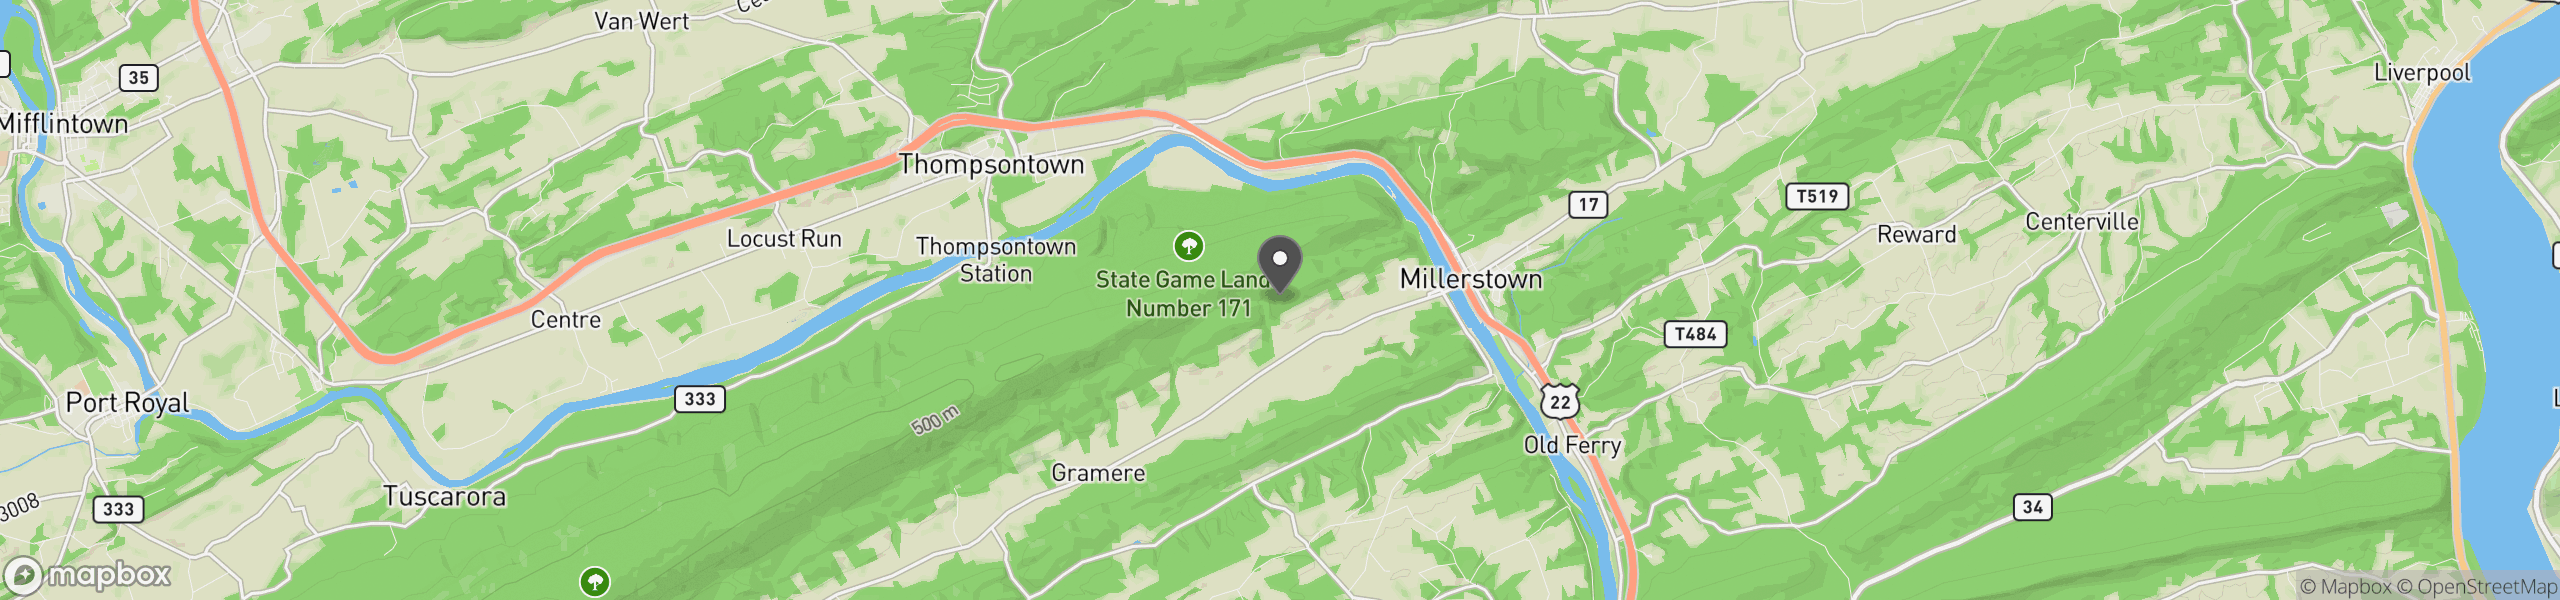 Millerstown, PA